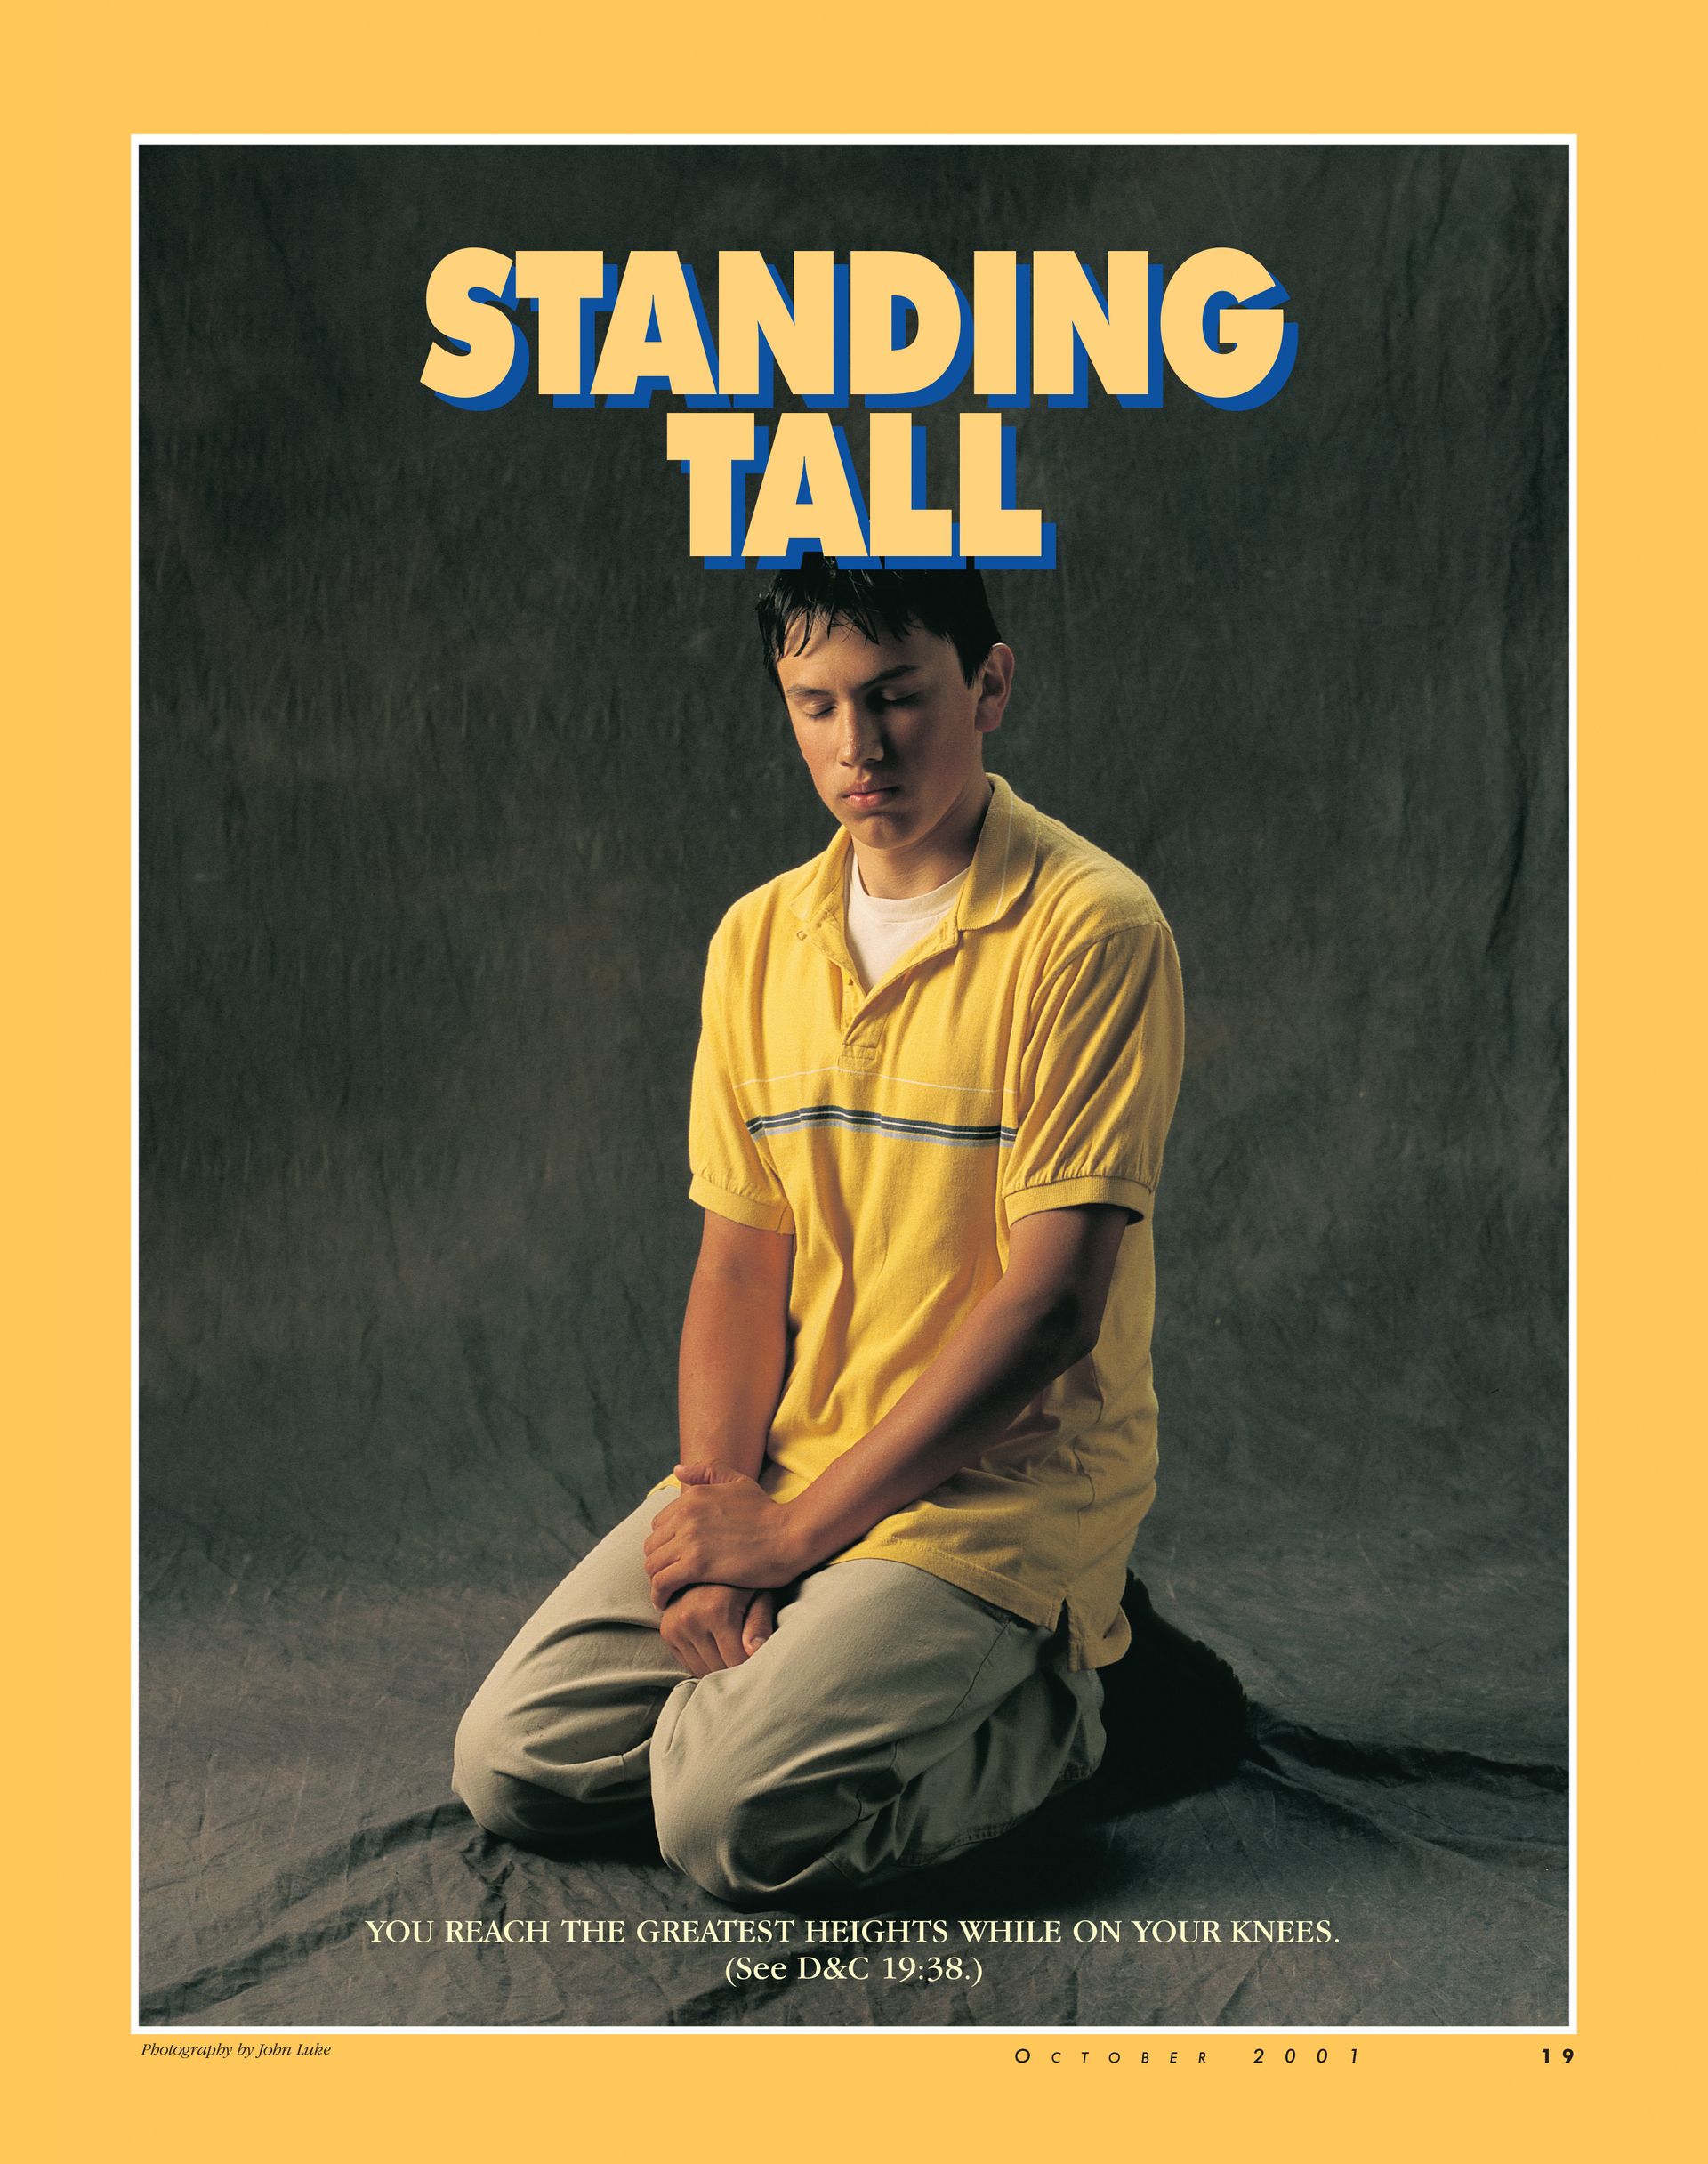 Standing Tall. You reach the greatest heights while on your knees. (See D&C 19:38.) Oct. 2001 © undefined ipCode 1.